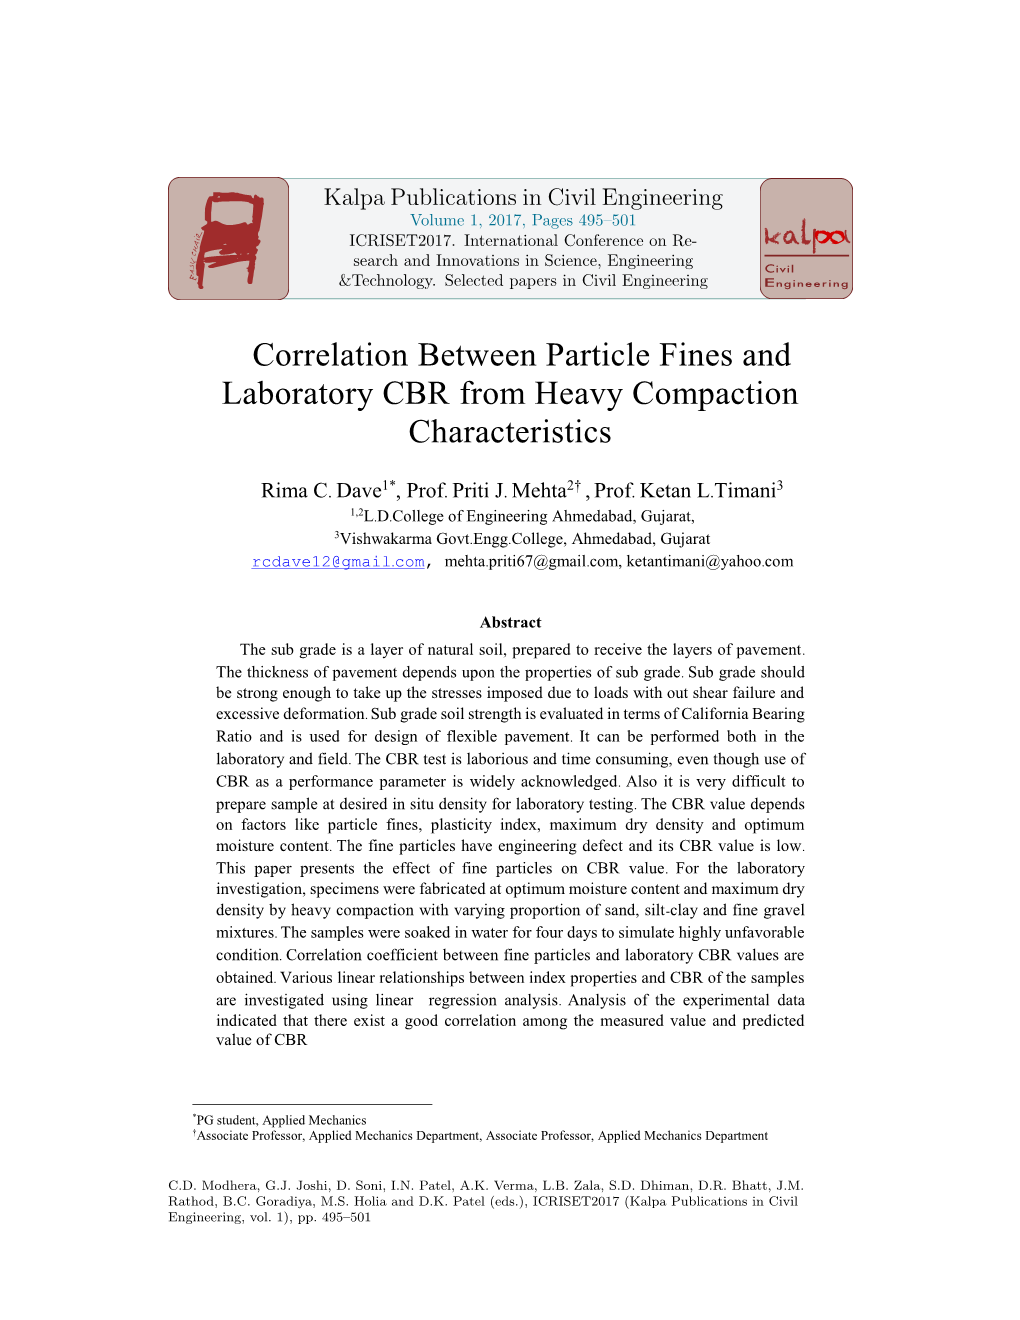 Correlation Between Particle Fines and Laboratory CBR from Heavy Compaction Characteristics